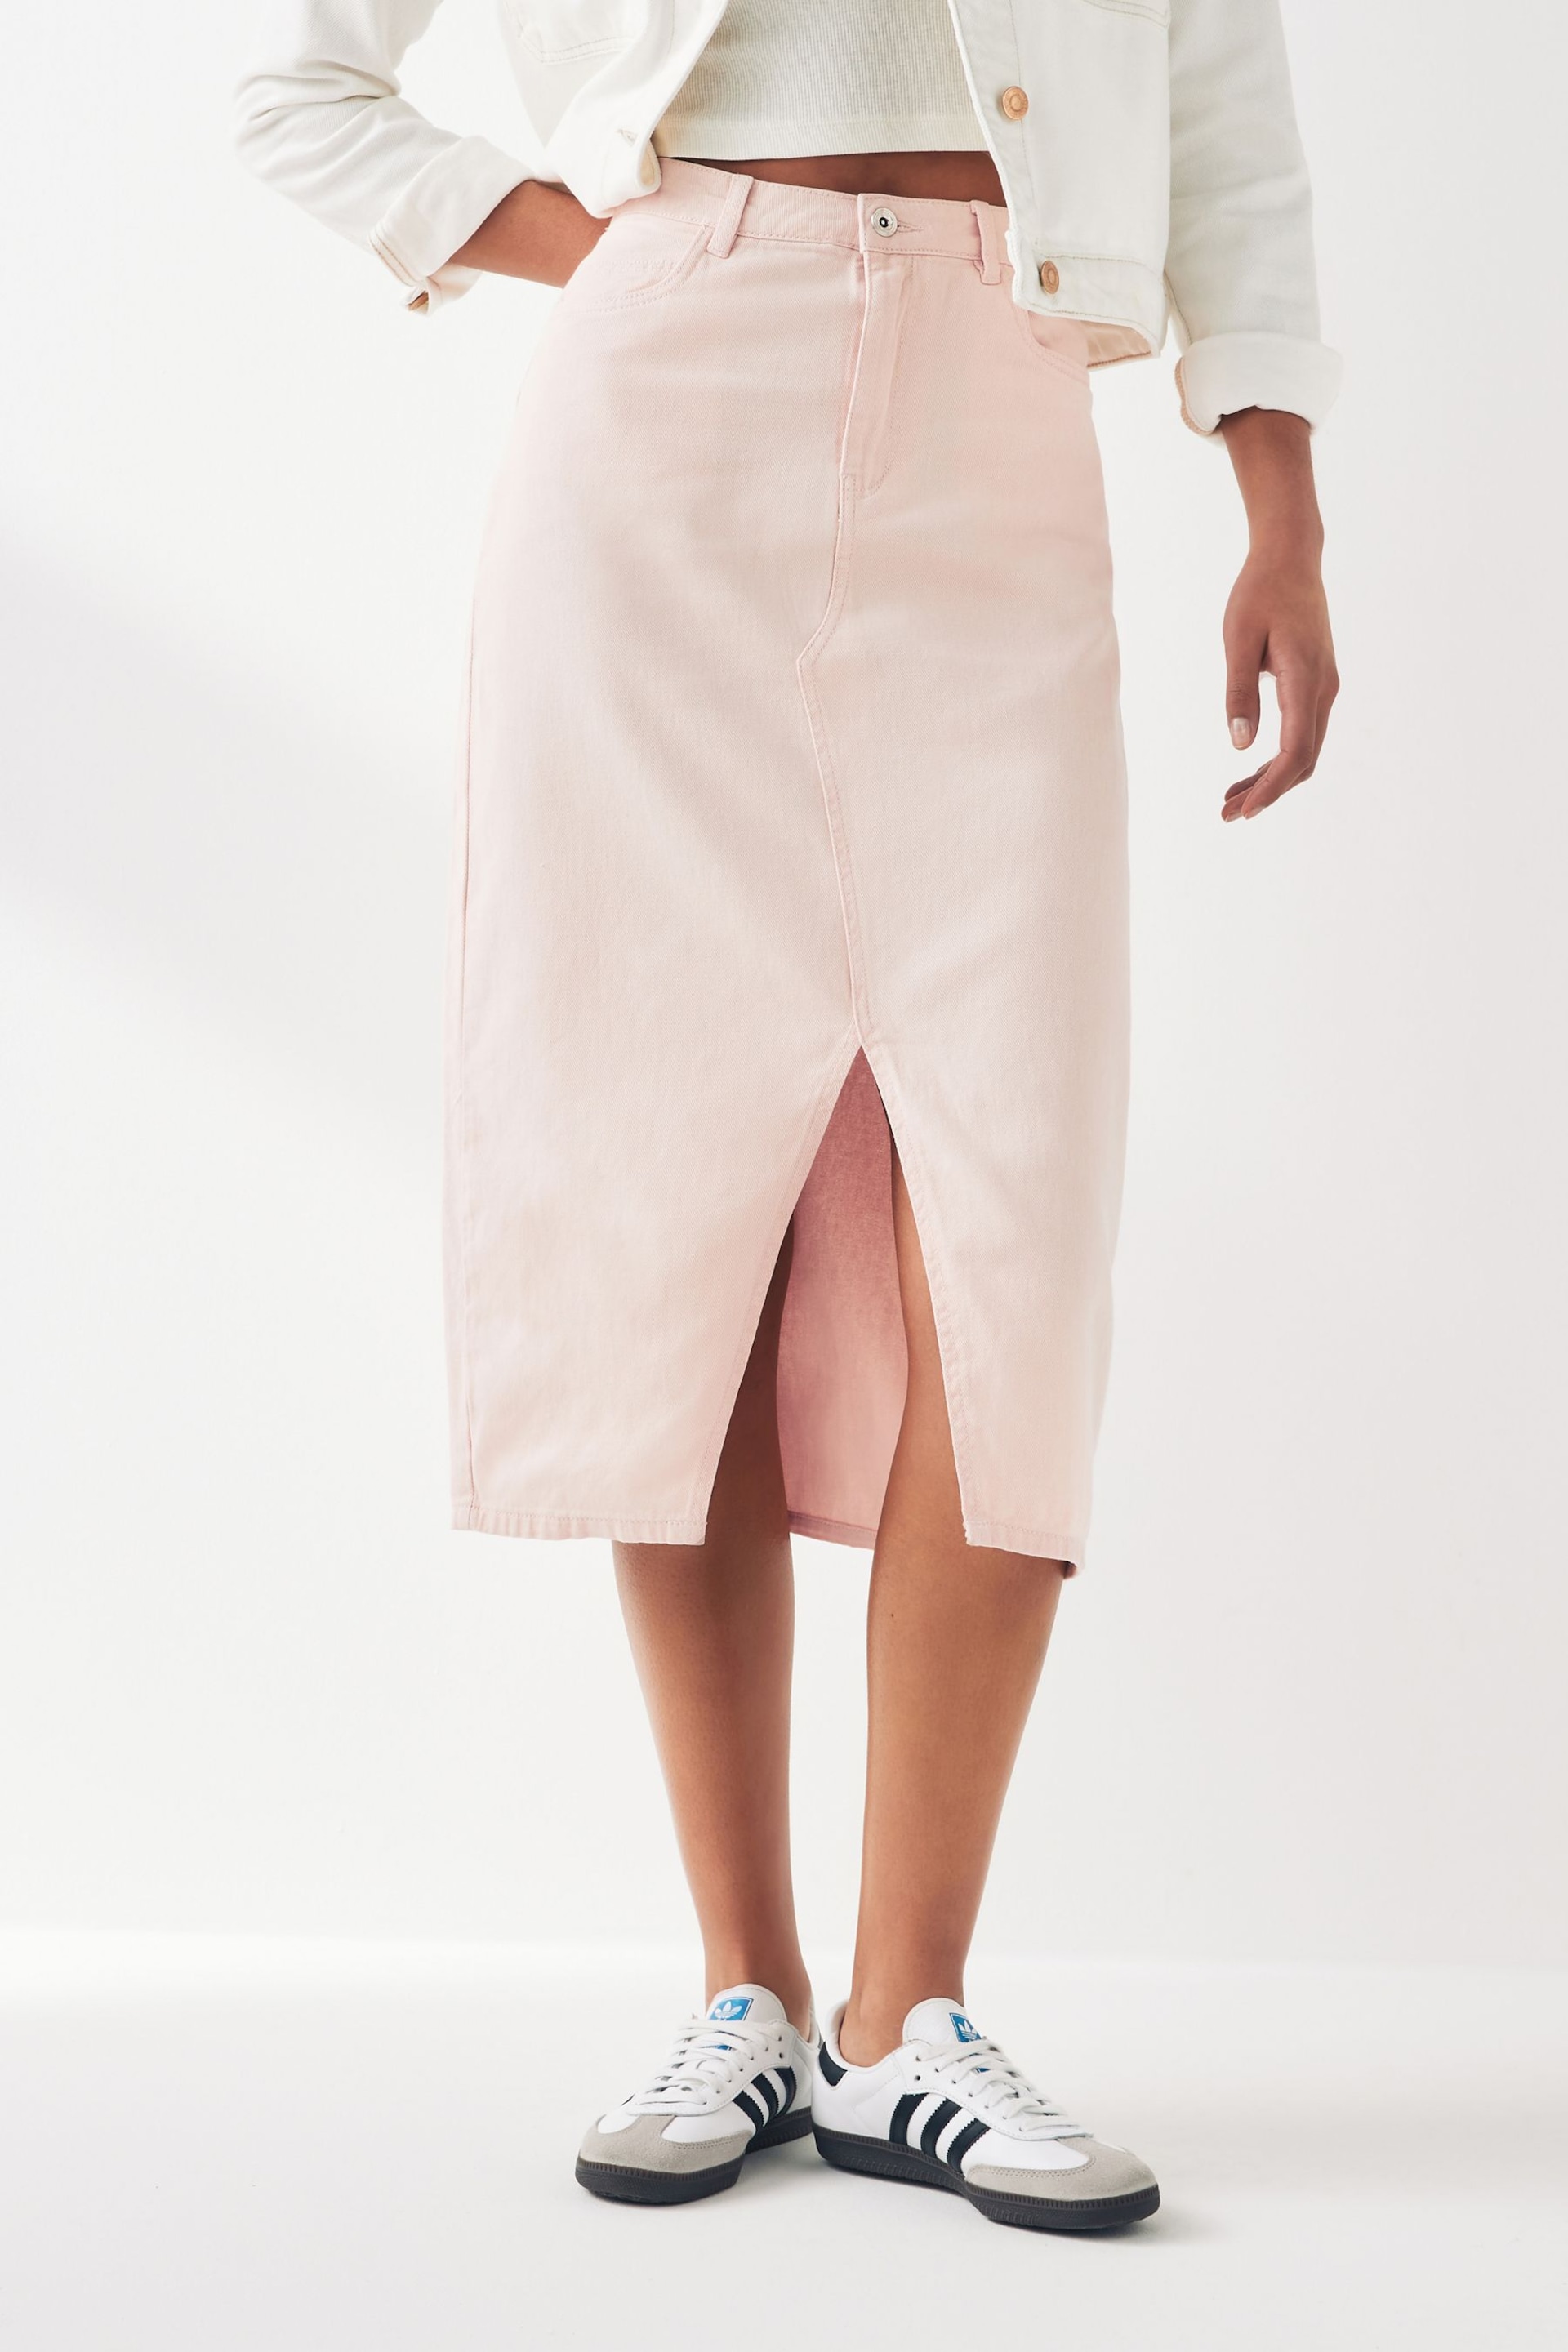 ONLY Pink Denim Midi Skirt With Front Split - Image 1 of 5